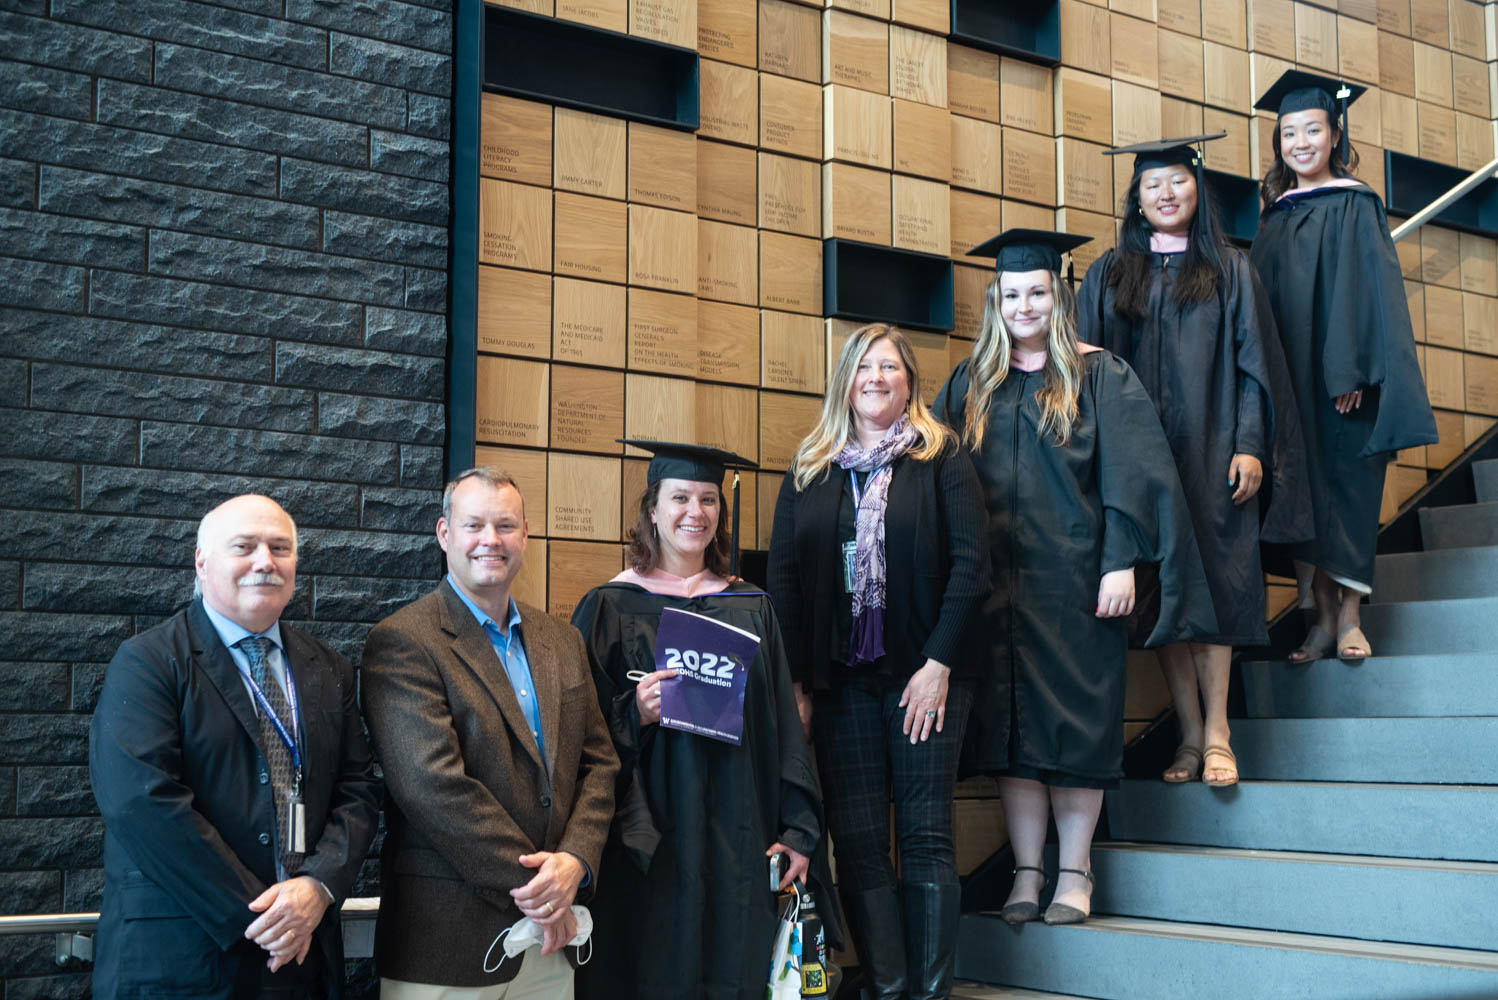 MPH graduates stand with DEOHS faculty on steps at the Hans Rosling Center for Population Health.